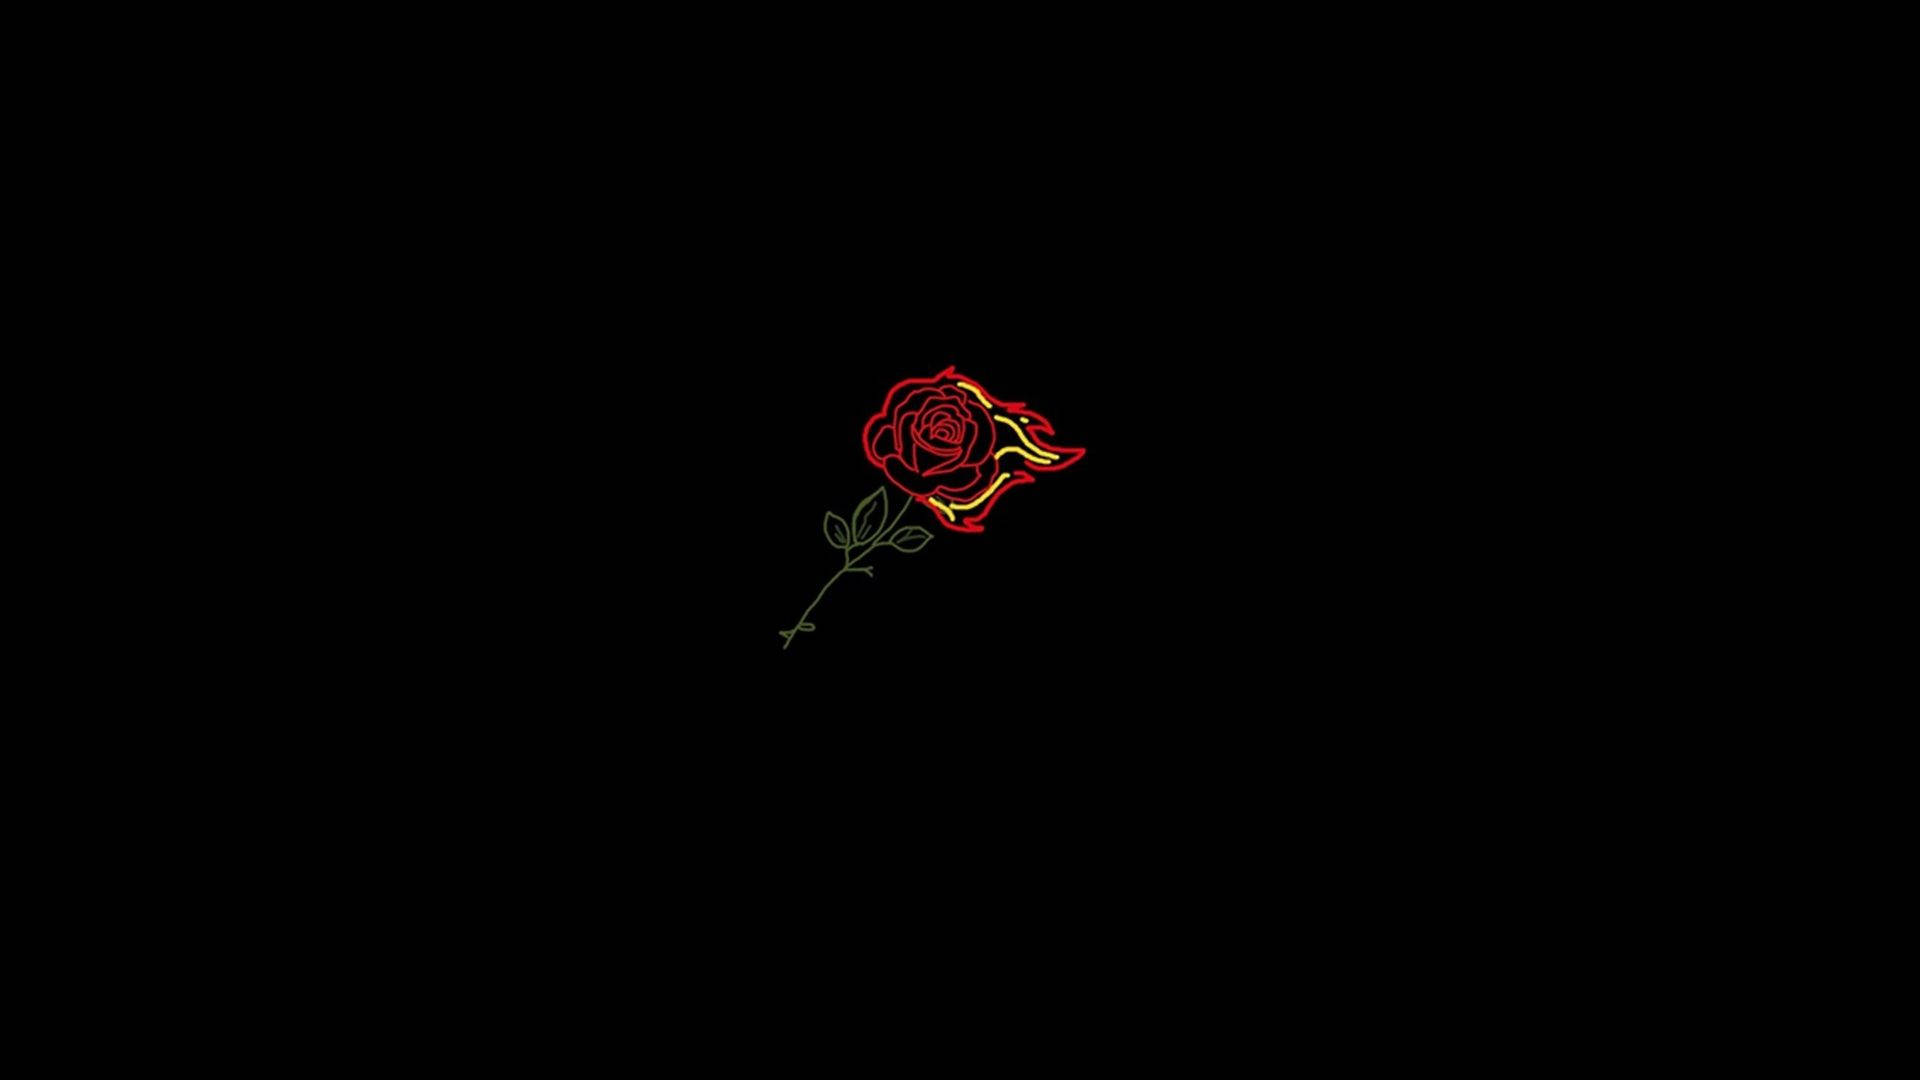 Aesthetic Profile Picture Of Red Rose Wallpaper